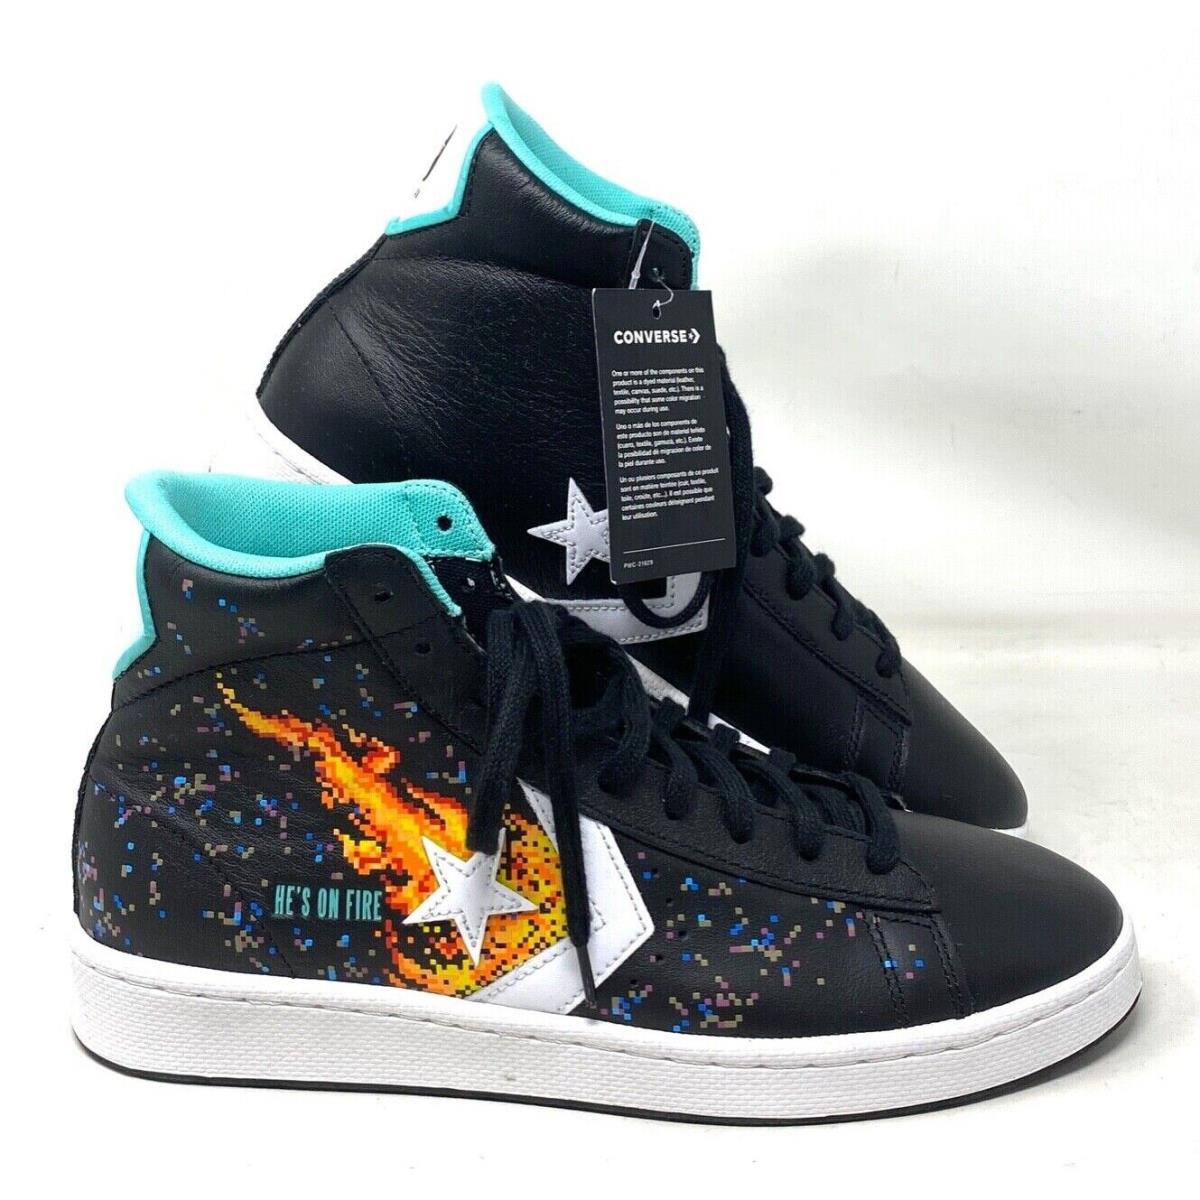 Converse Pro Leather High Nba Jam Shoes Black Men`s Basketball Sneakers 171313C